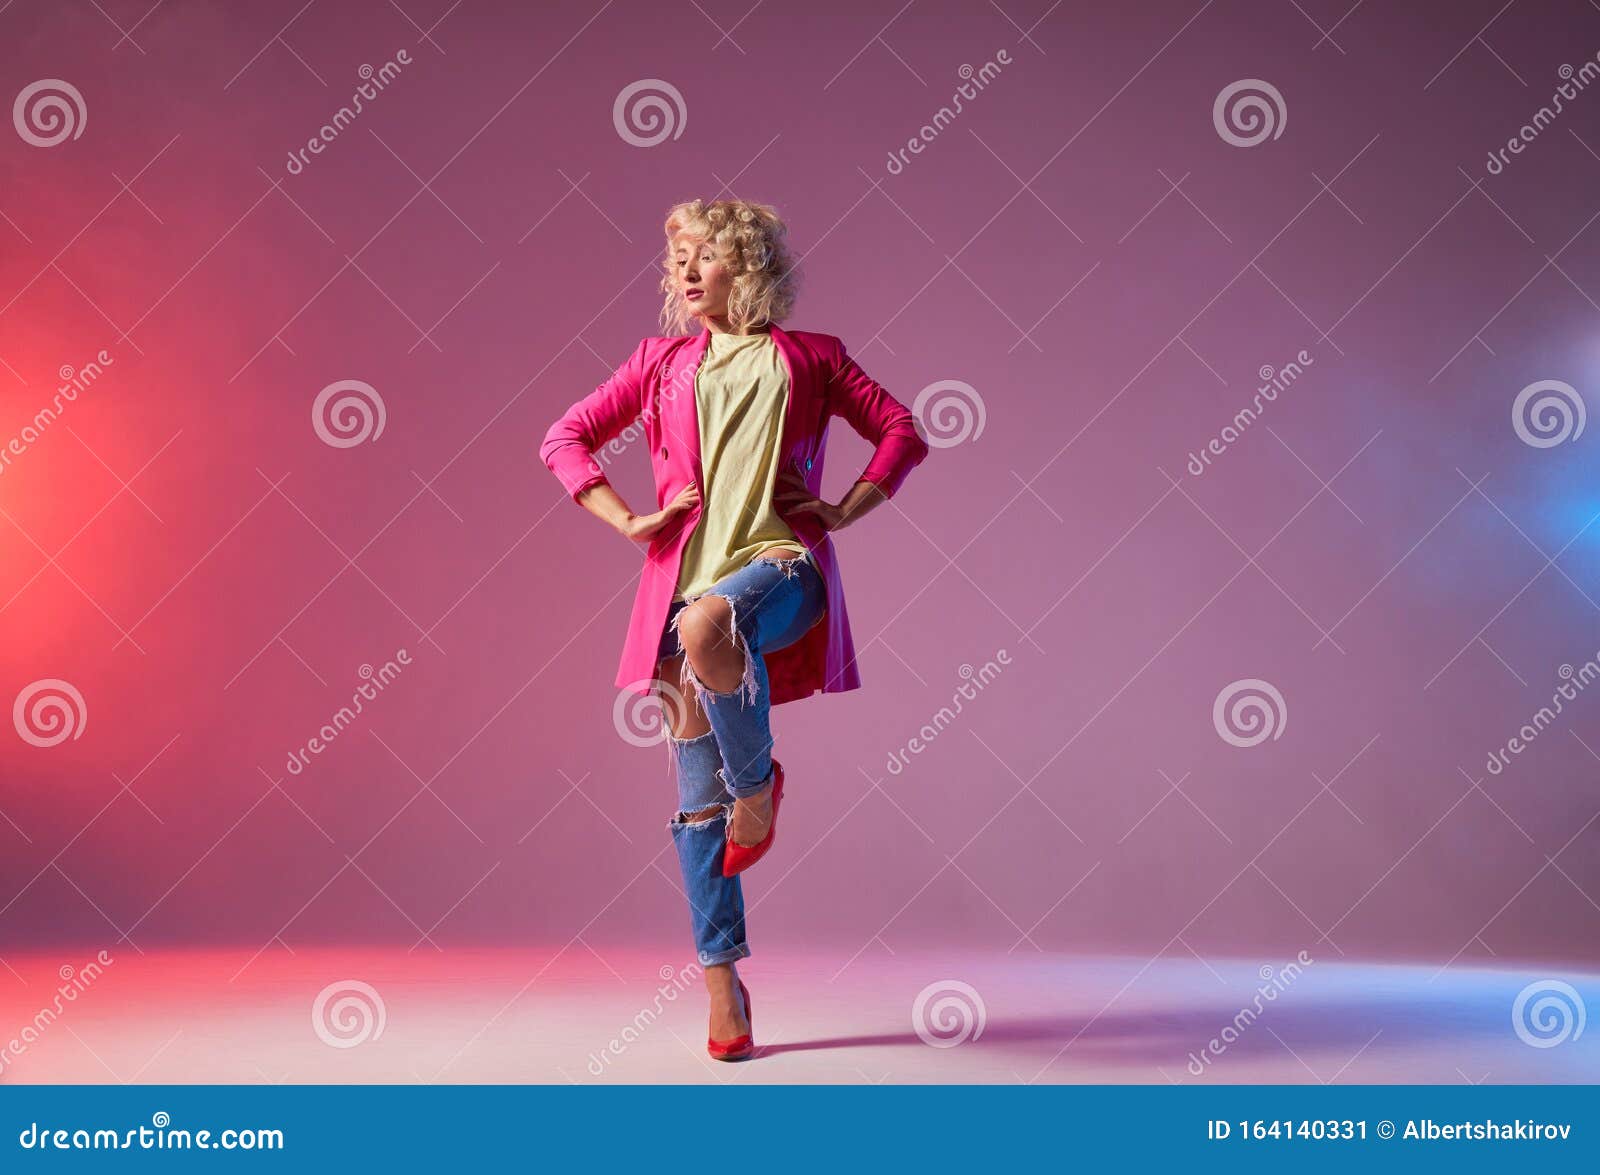 Dancer Poses in Front of Studio Background Stock Image - Image of cool,  dance: 164140331